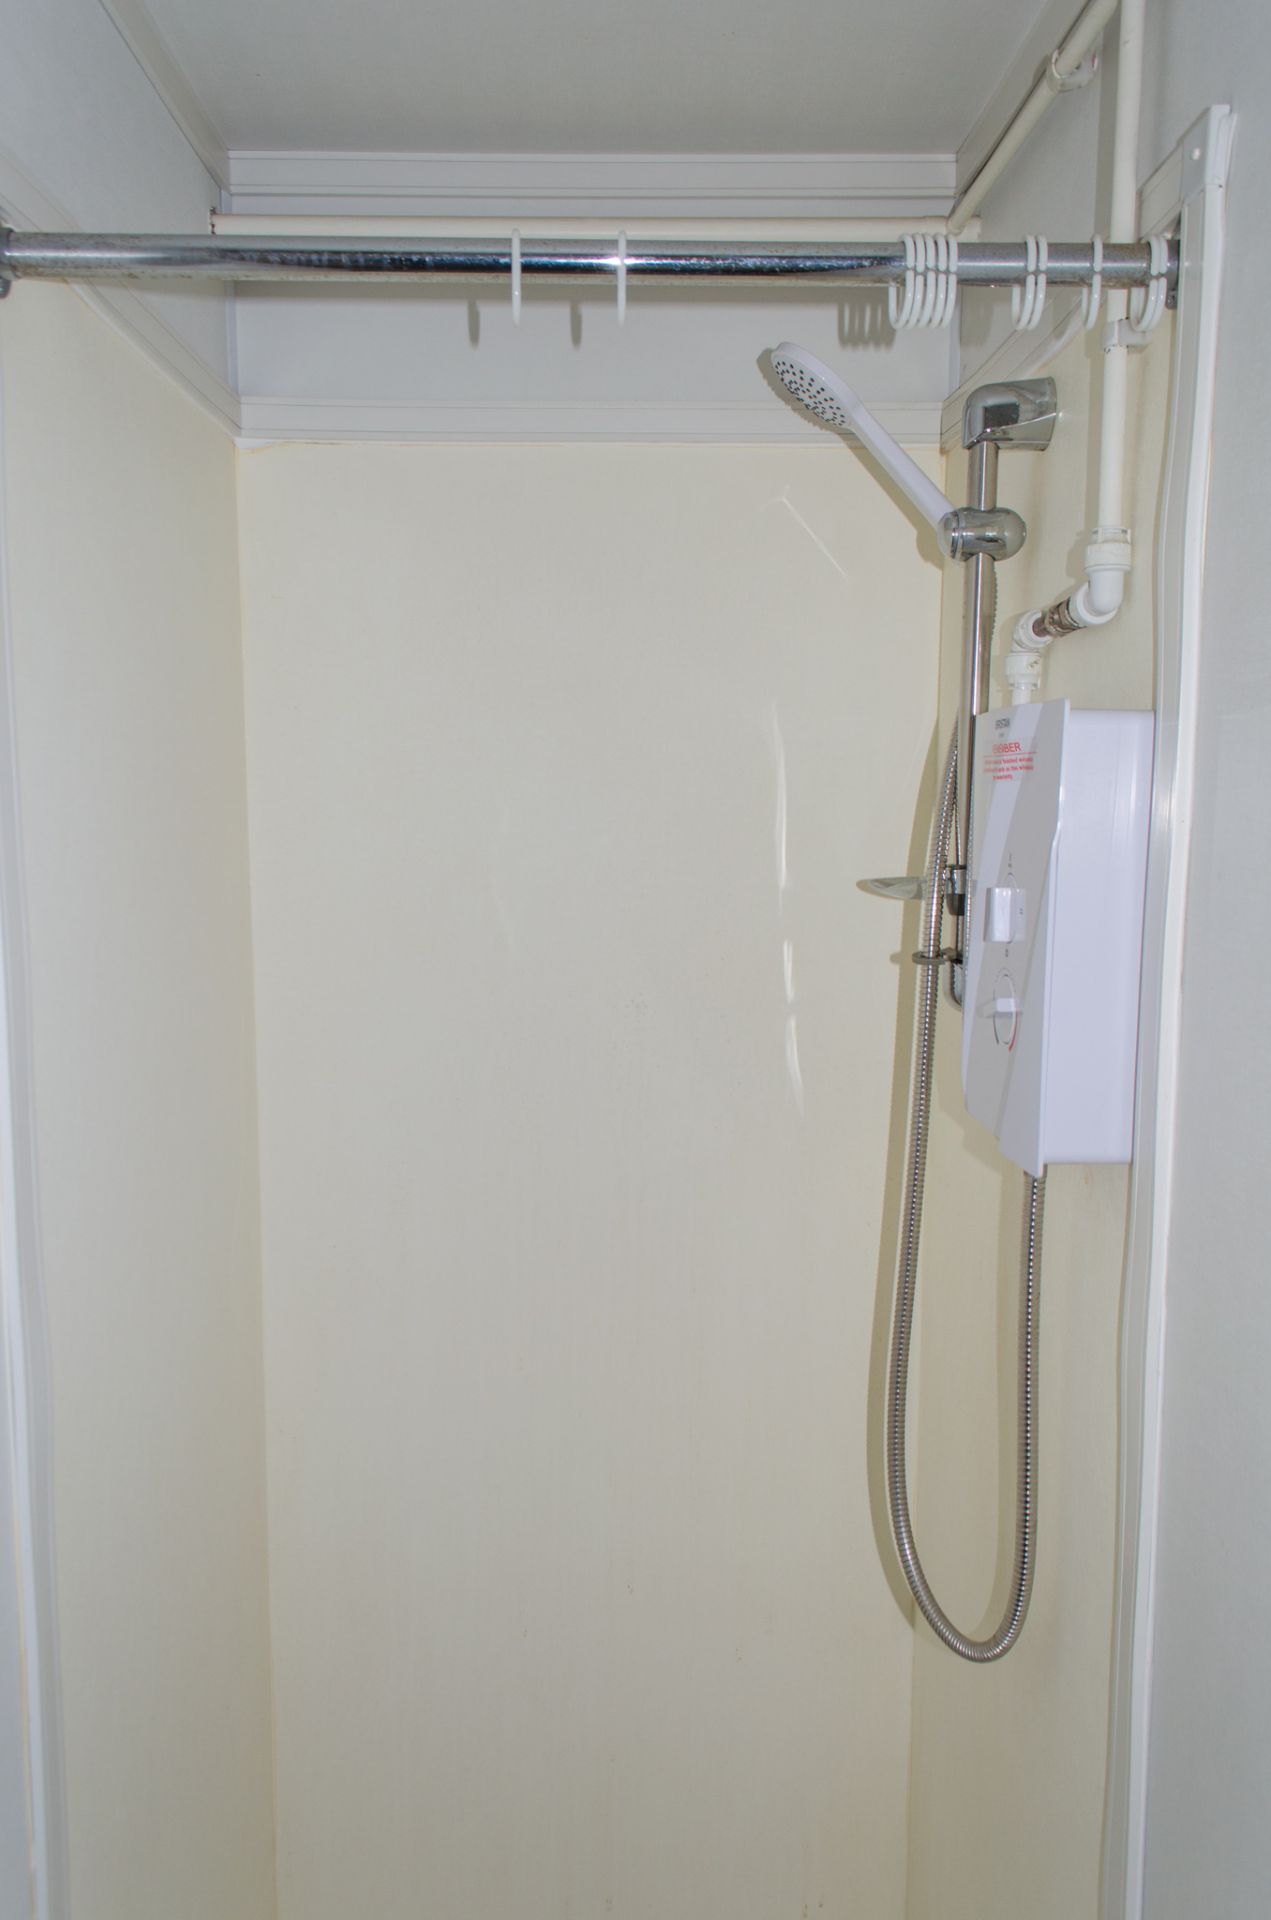 32 ft x 10 ft steel jack leg shower site unit Comprising of 8 - showers & changing area BBA1684 - Image 8 of 14